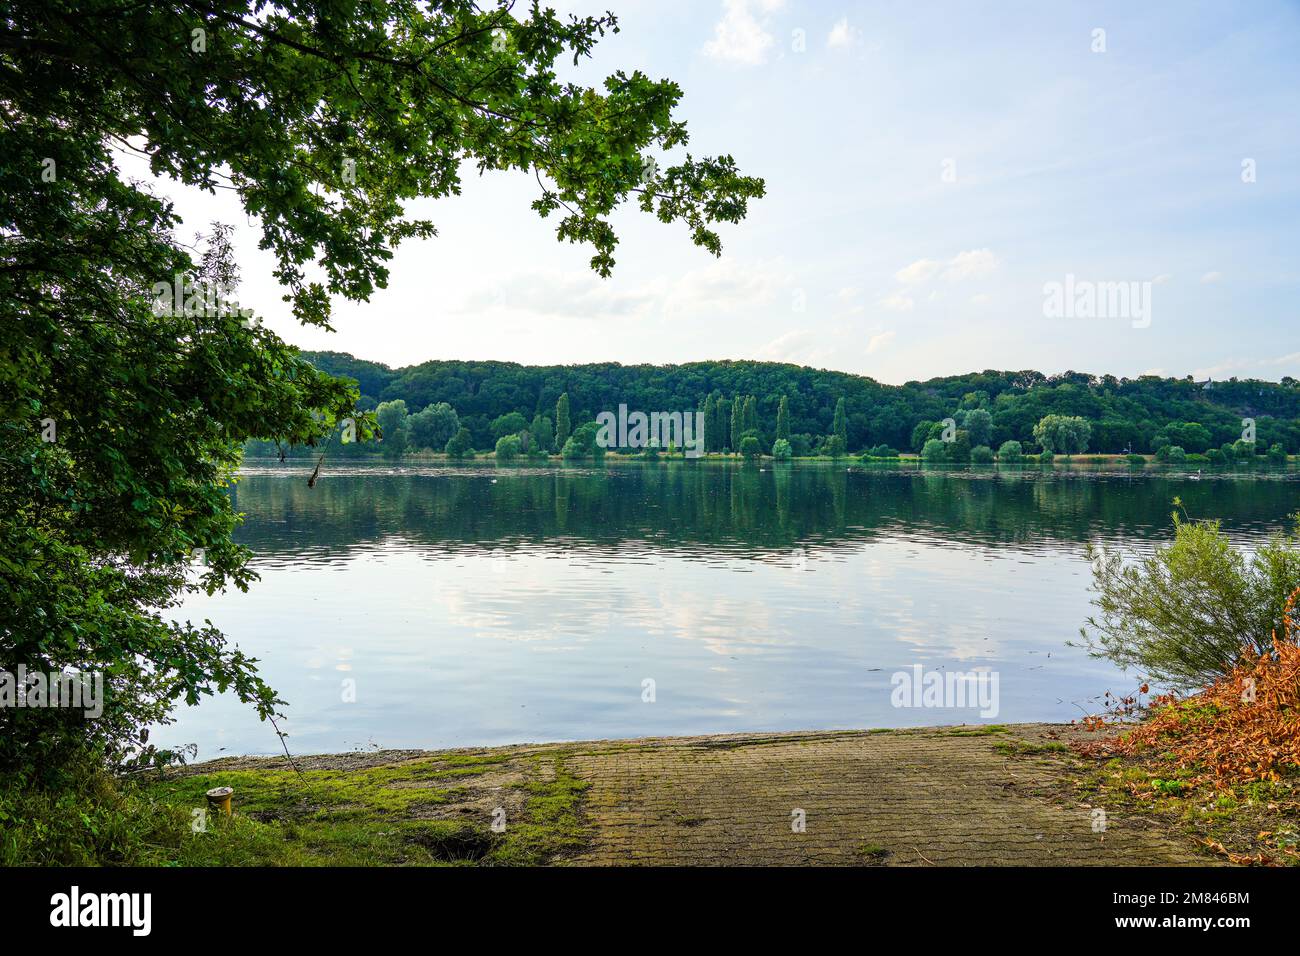 Kemnader See in the evening. Ruhr reservoir with surrounding nature. Landscape with a lake near Bochum in the Ruhr area. Stock Photo